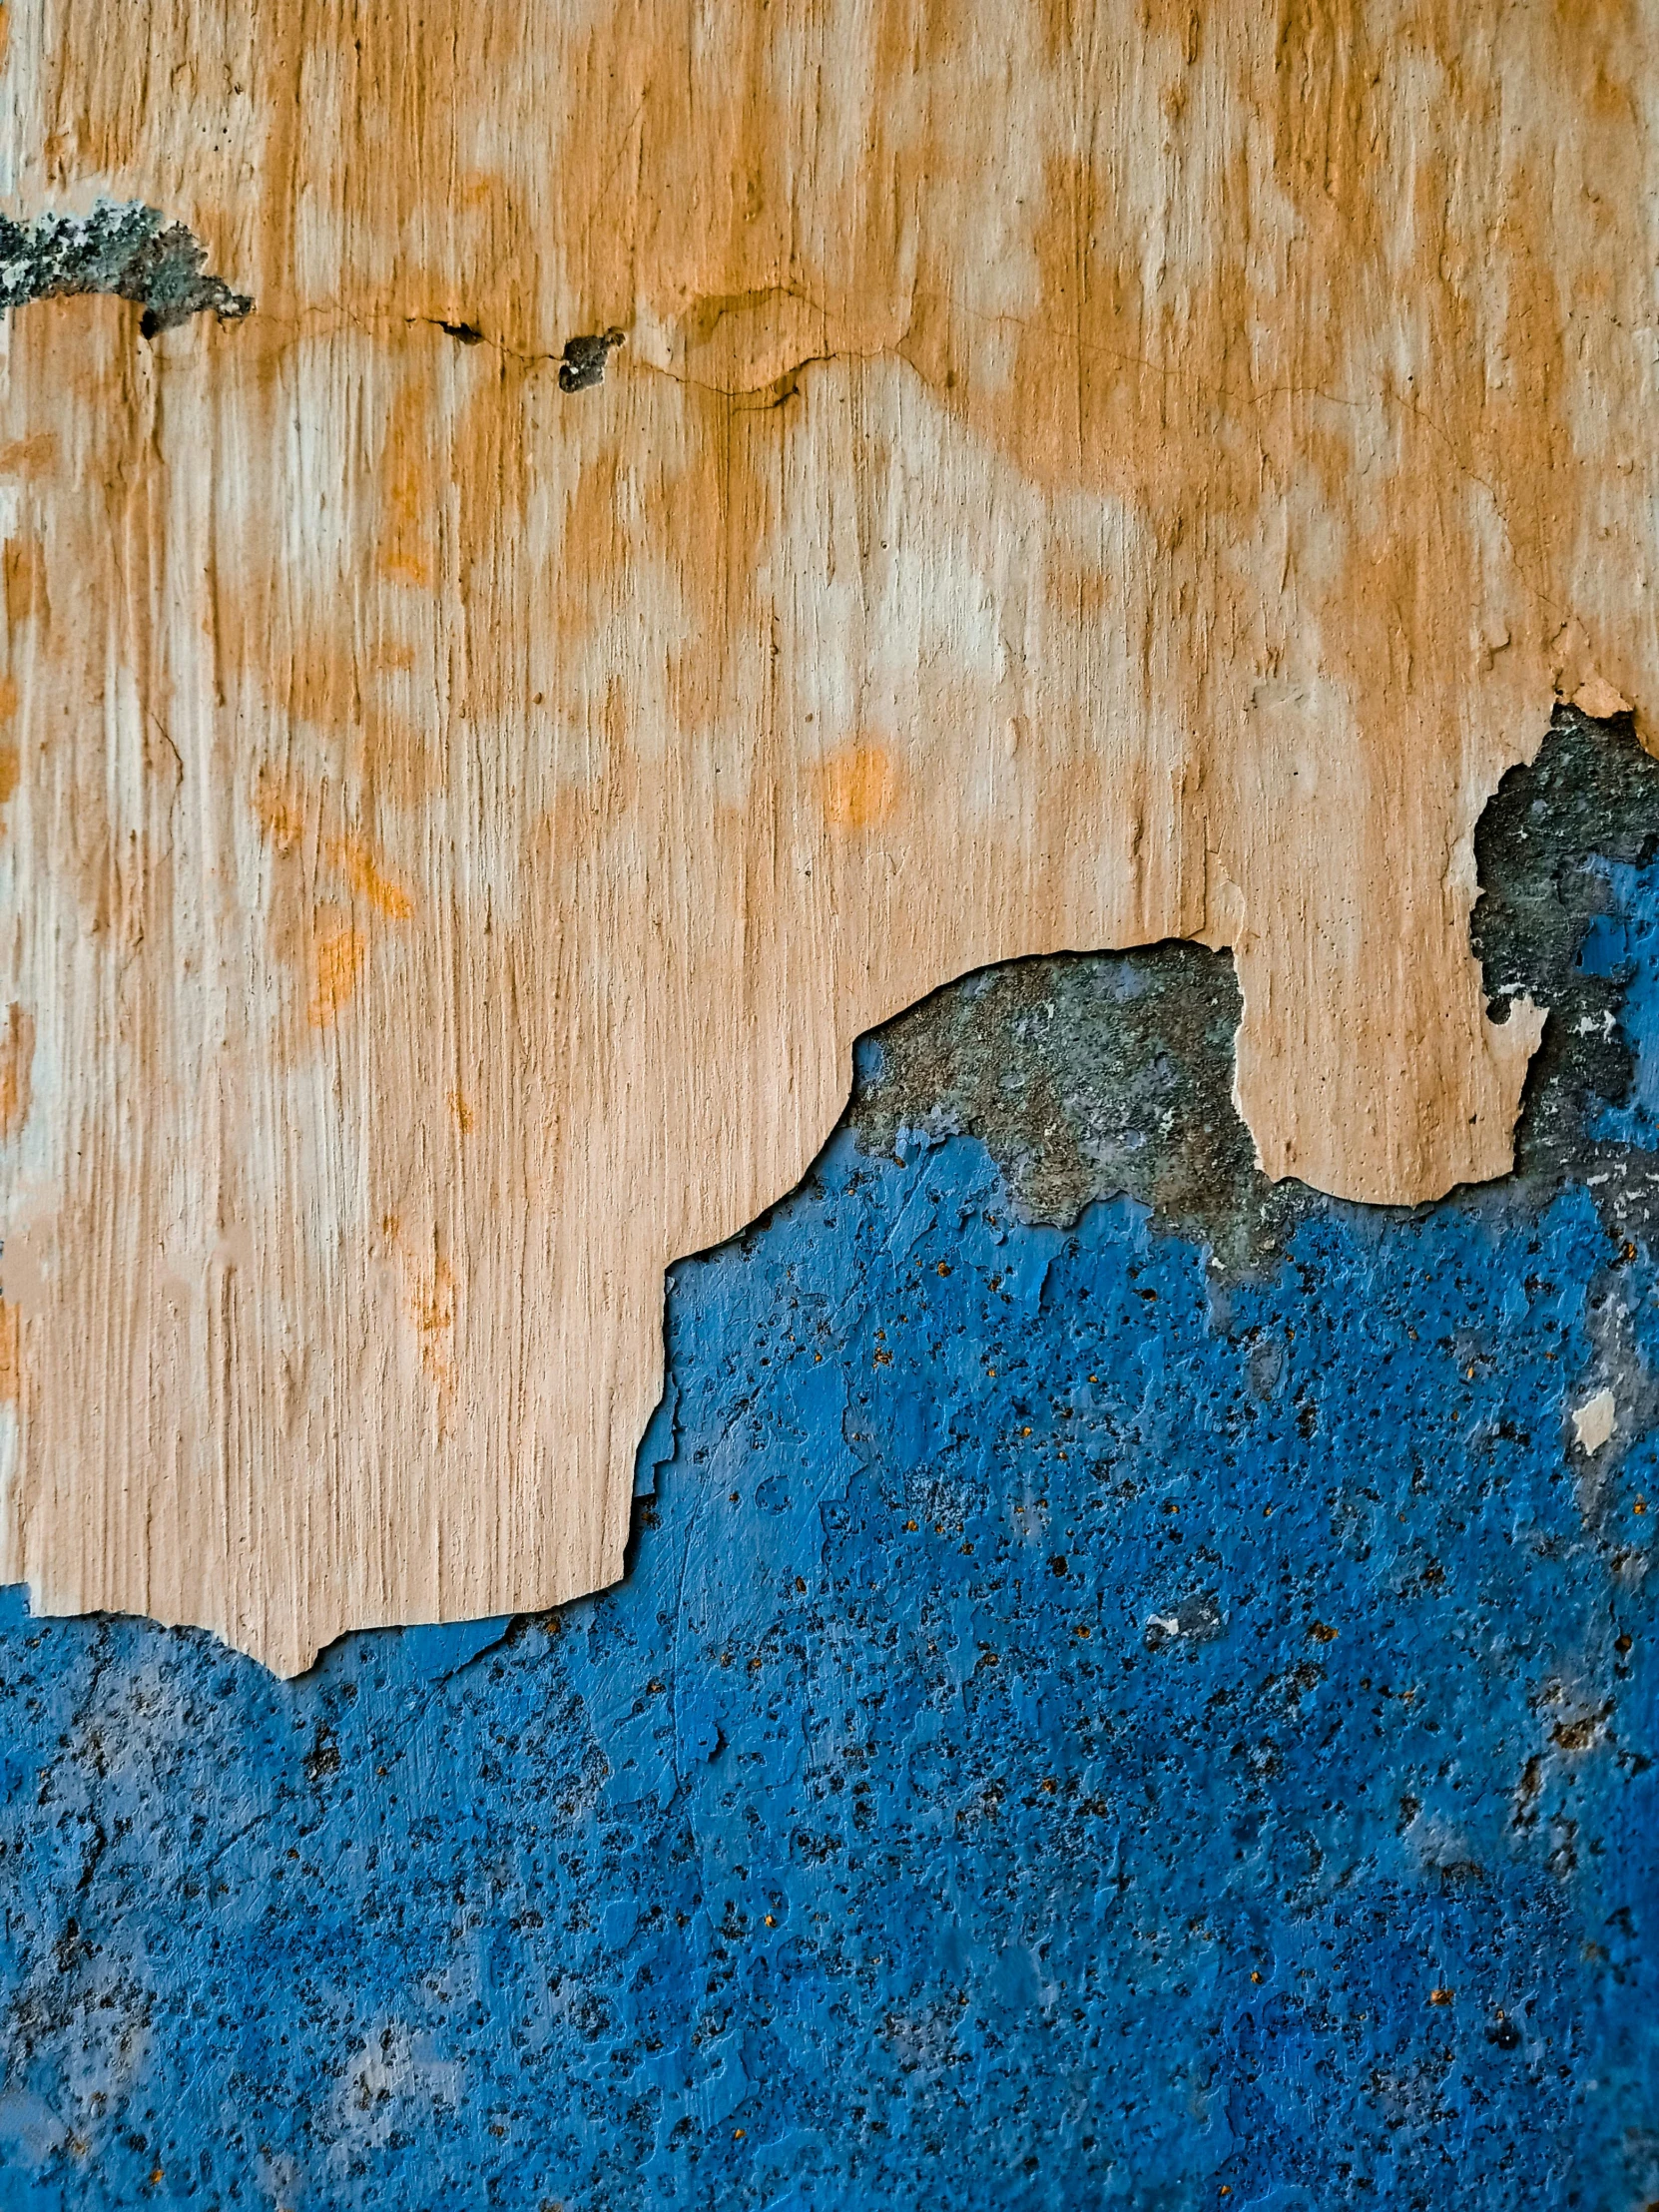 this is a pograph of wood with peeling paint